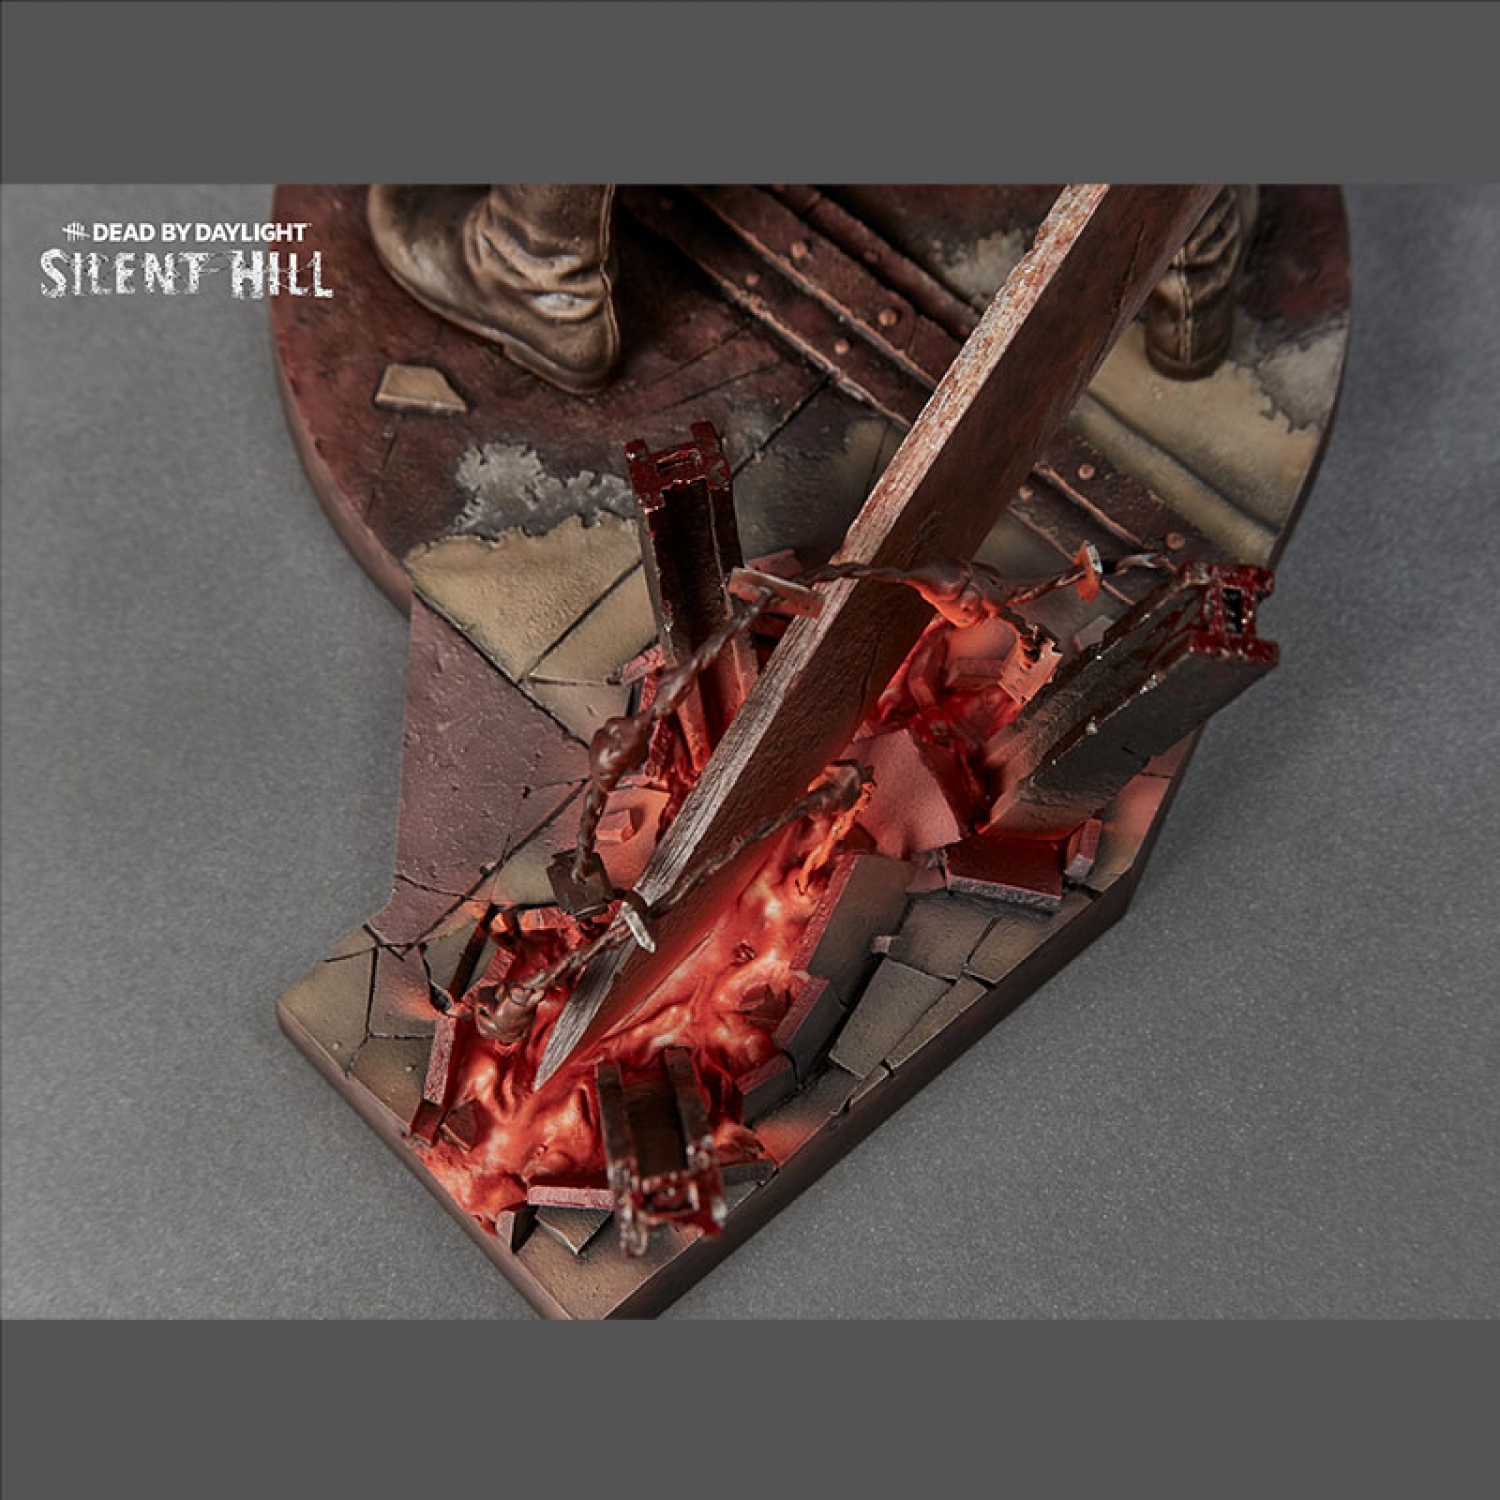 SILENT HILL x Dead by Daylight, The Executioner 1/6 Scale Premium Statue